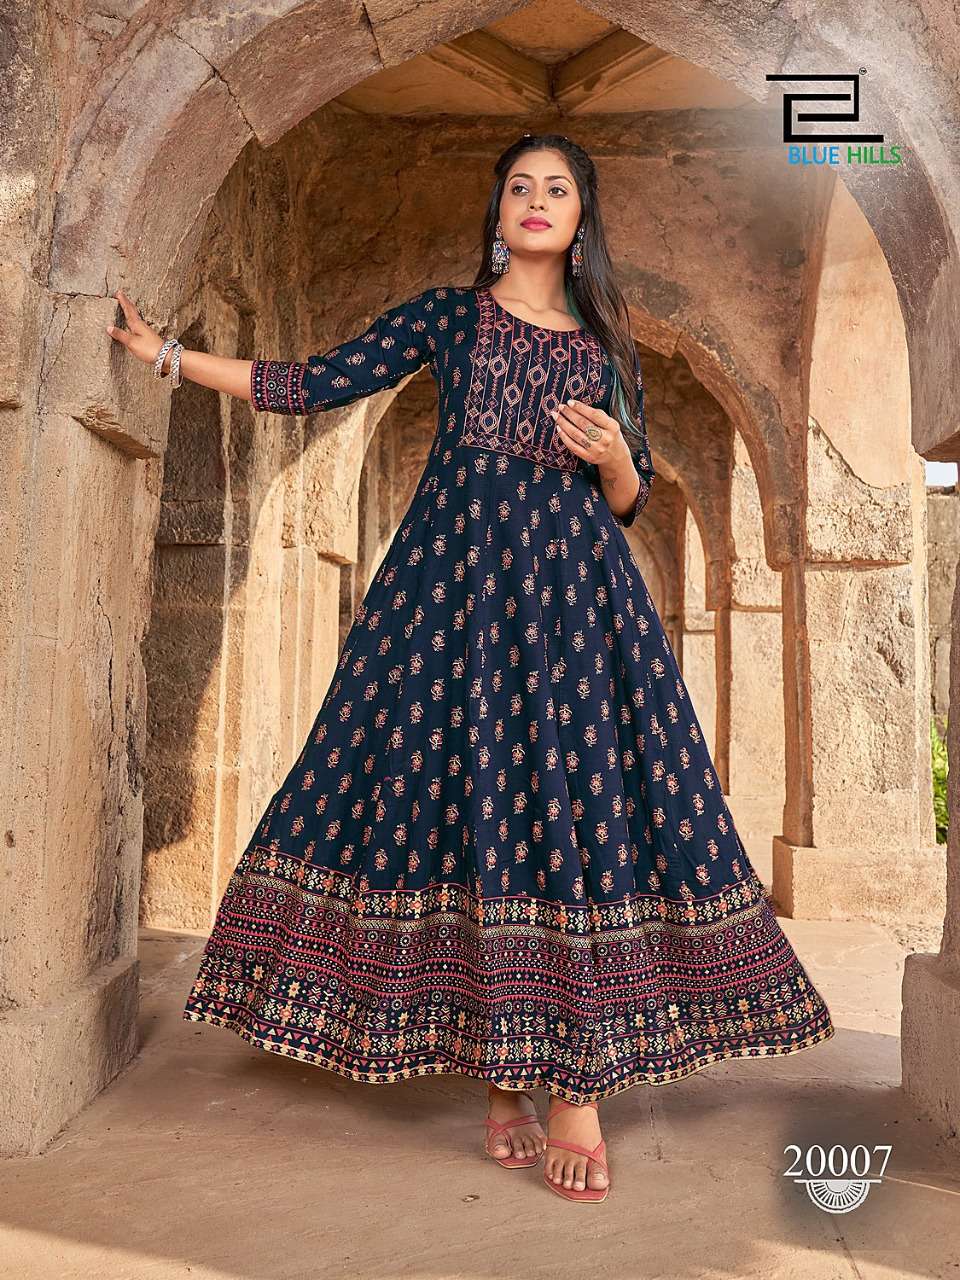 UP TO DATE VOL-20 BY BLUE HILLS 20001 TO 20008 SERIES BEAUTIFUL STYLISH FANCY COLORFUL CASUAL WEAR & ETHNIC WEAR RAYON FOIL GOWNS AT WHOLESALE PRICE